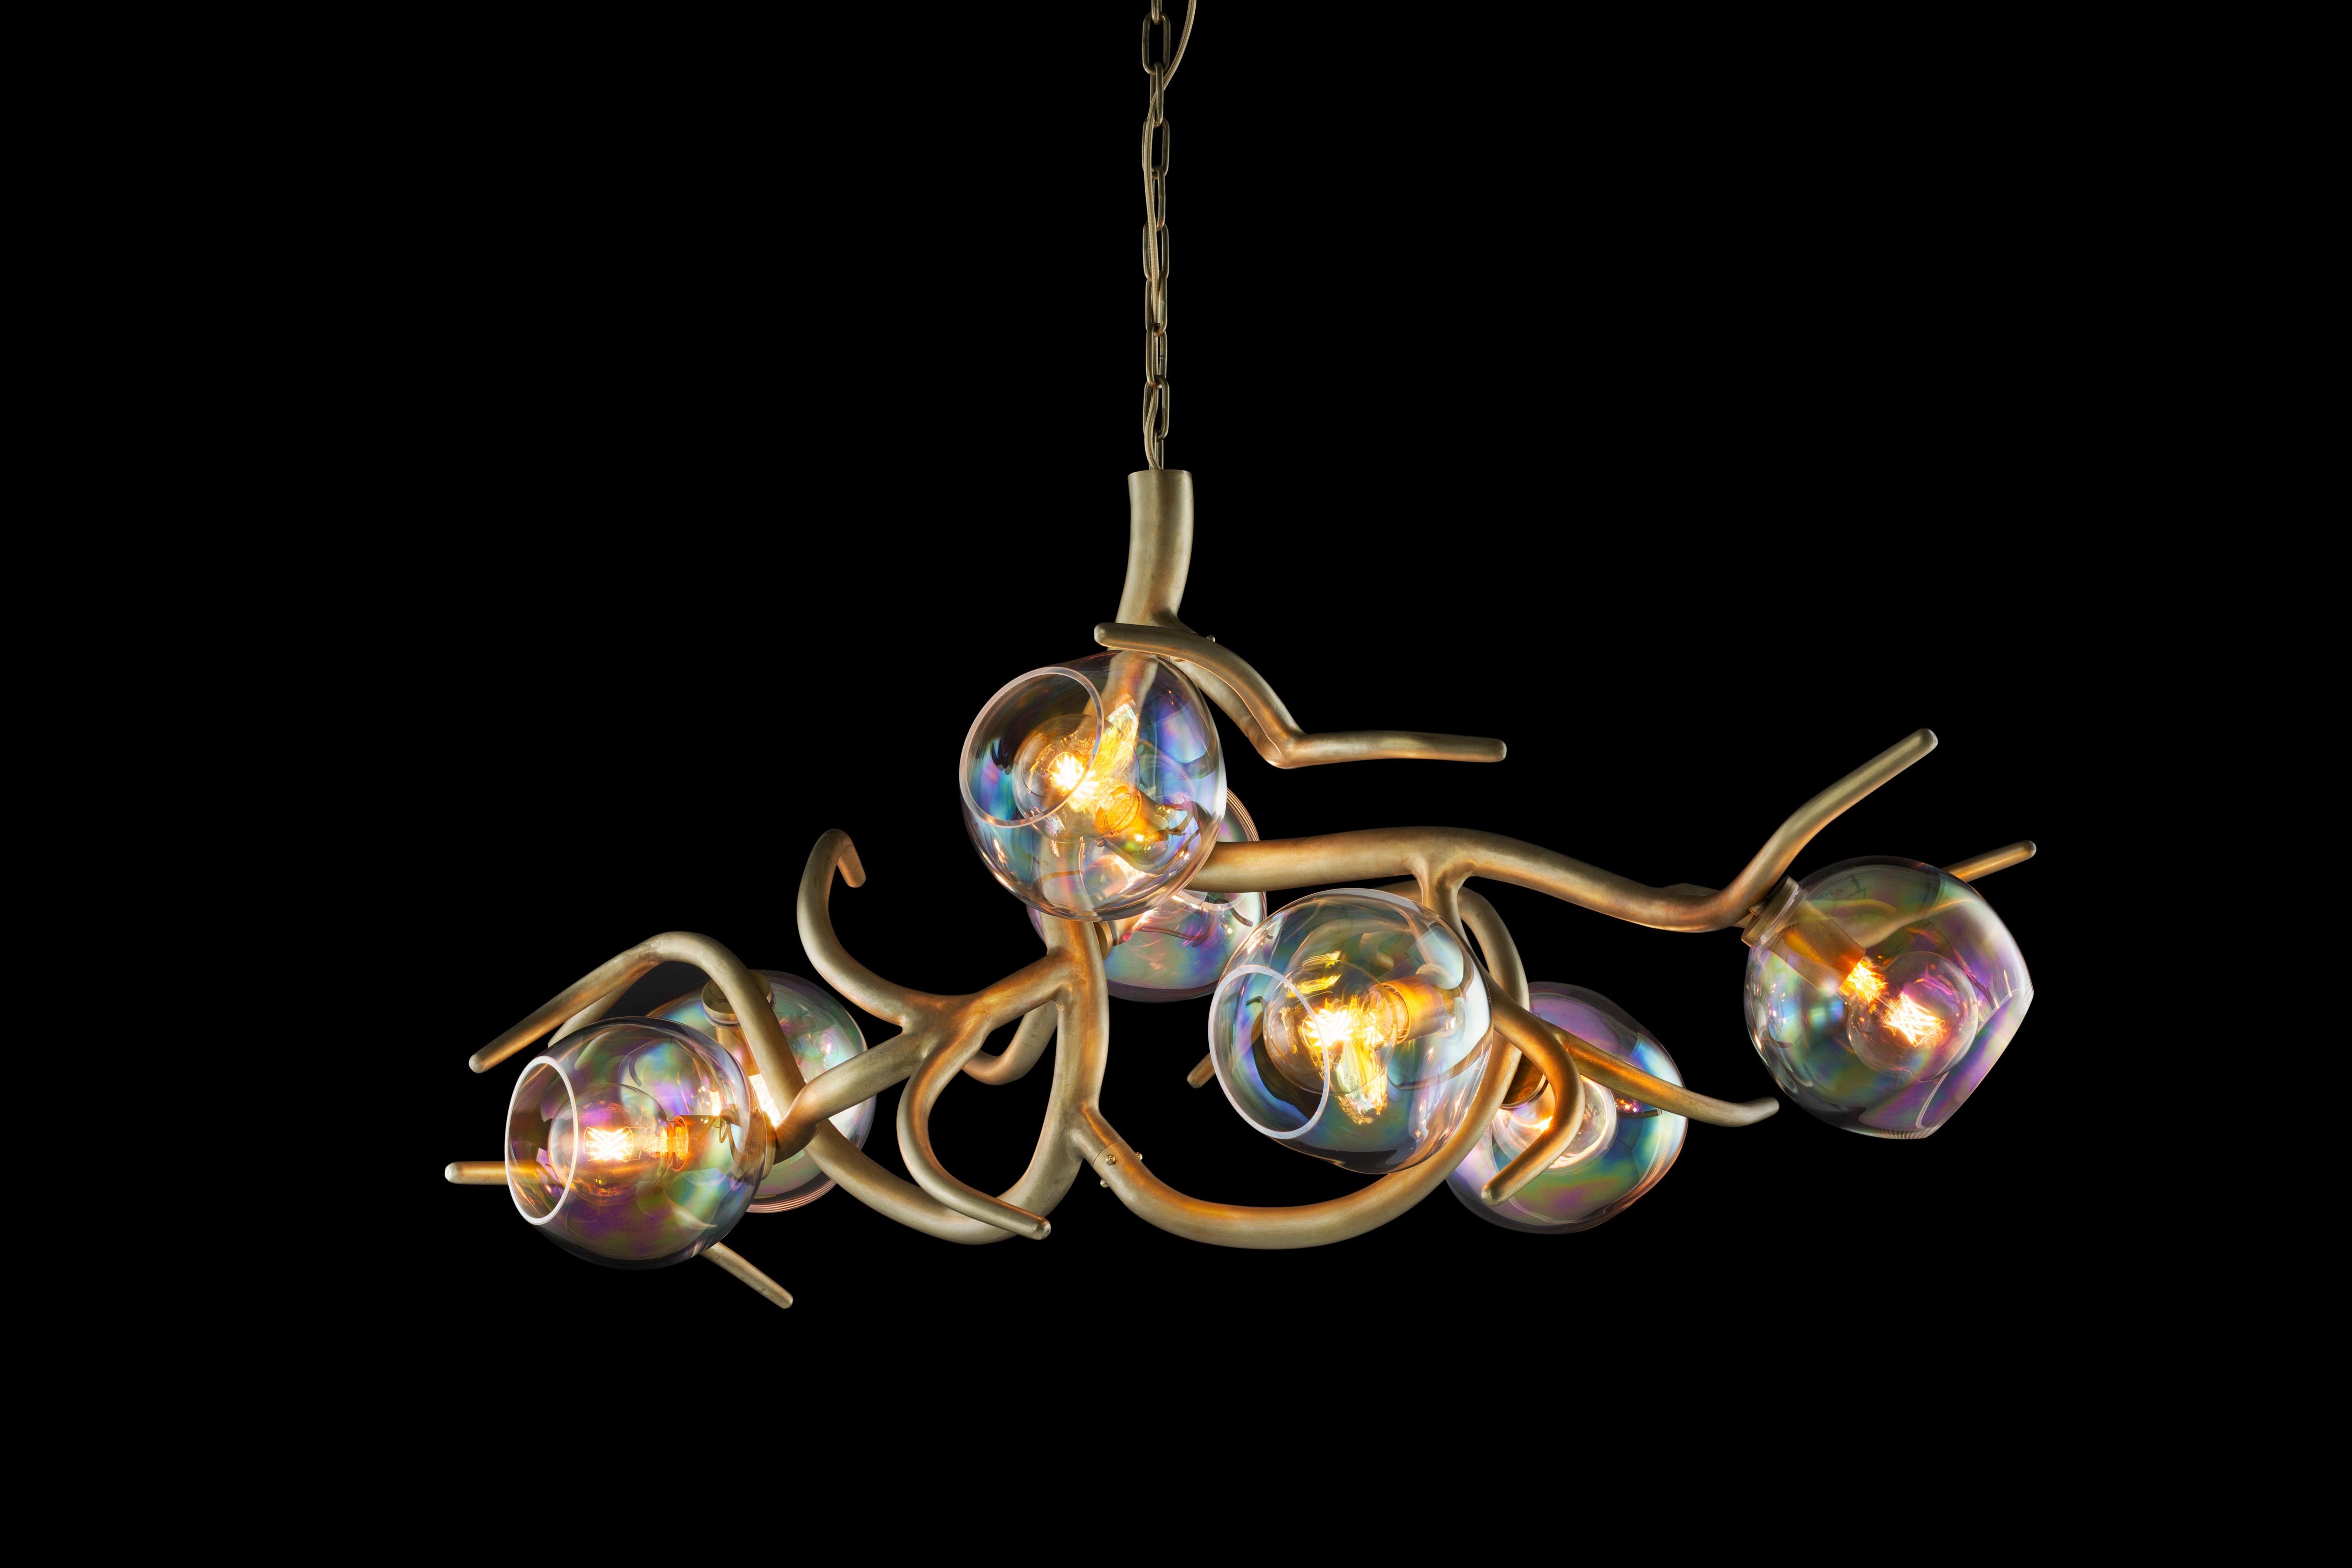 The Ersa is available in this modern chandelier oval with iridescent glass spheres, created to bring light and character into an interior, for example above a long dining table. Crafted by our craftsman and glassblowers into a beautifully organic